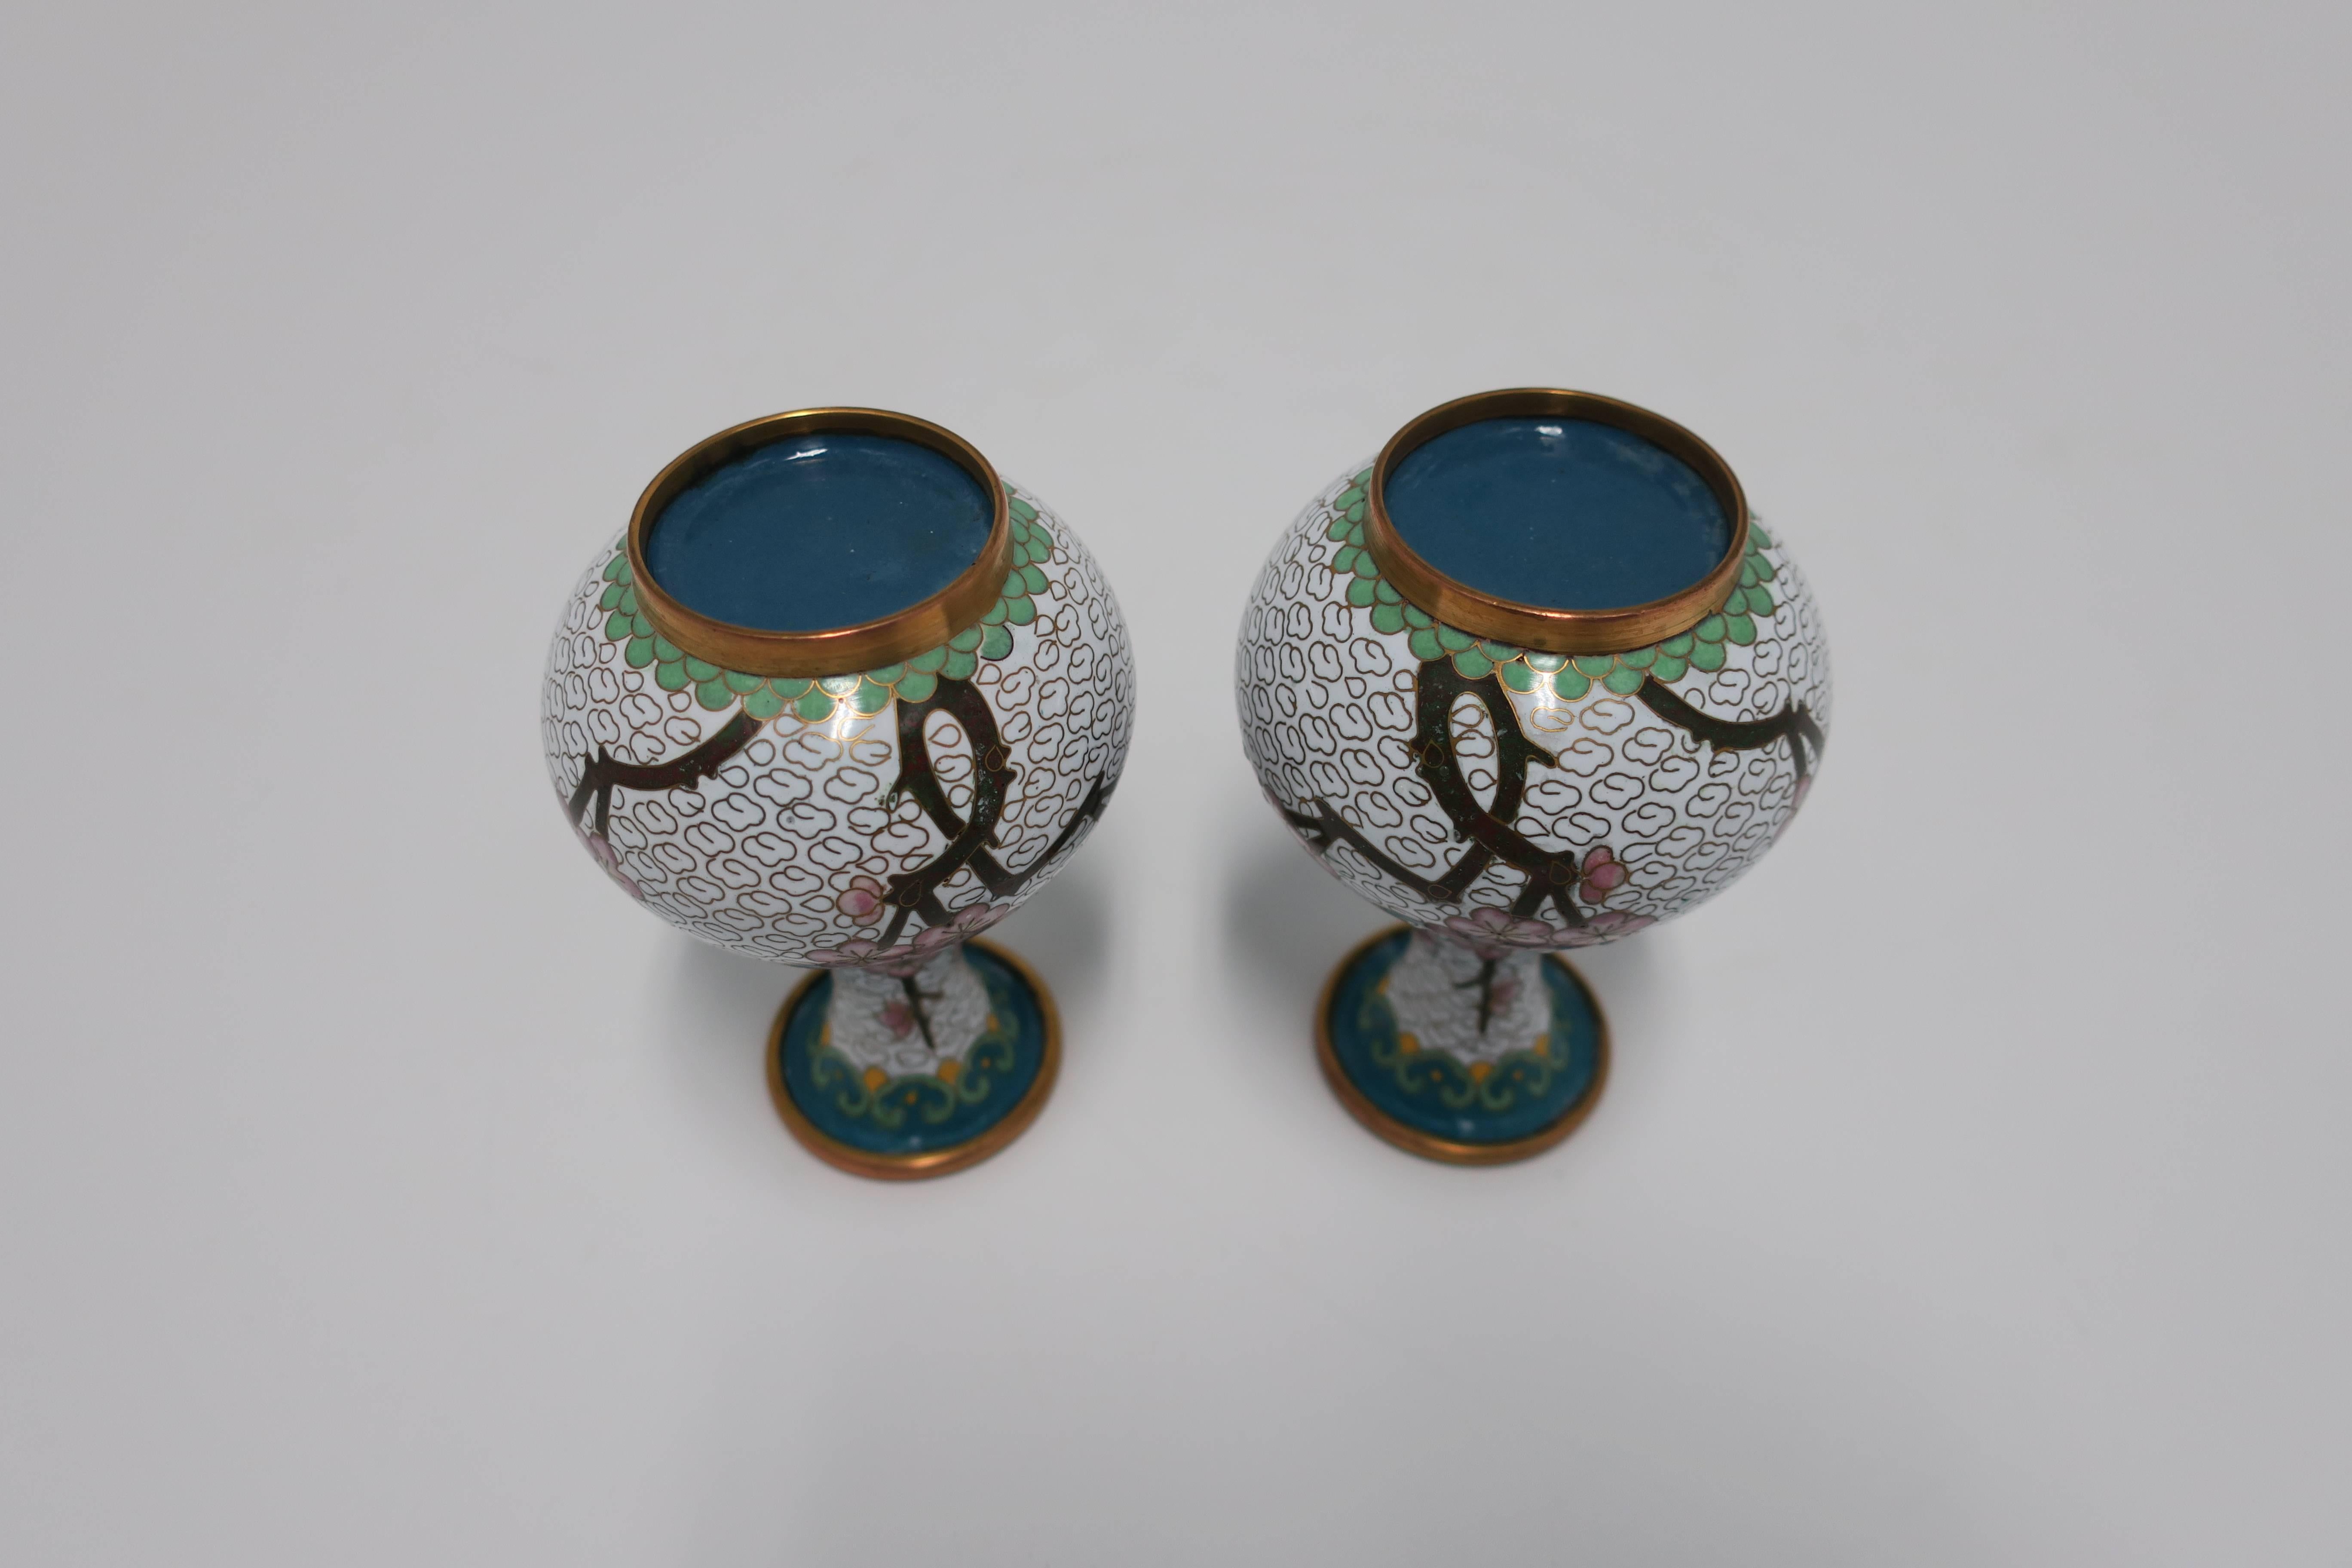 White and Pink Cloisonné Enamel Brass Vases with Cherry Blossom Design, Pair For Sale 5